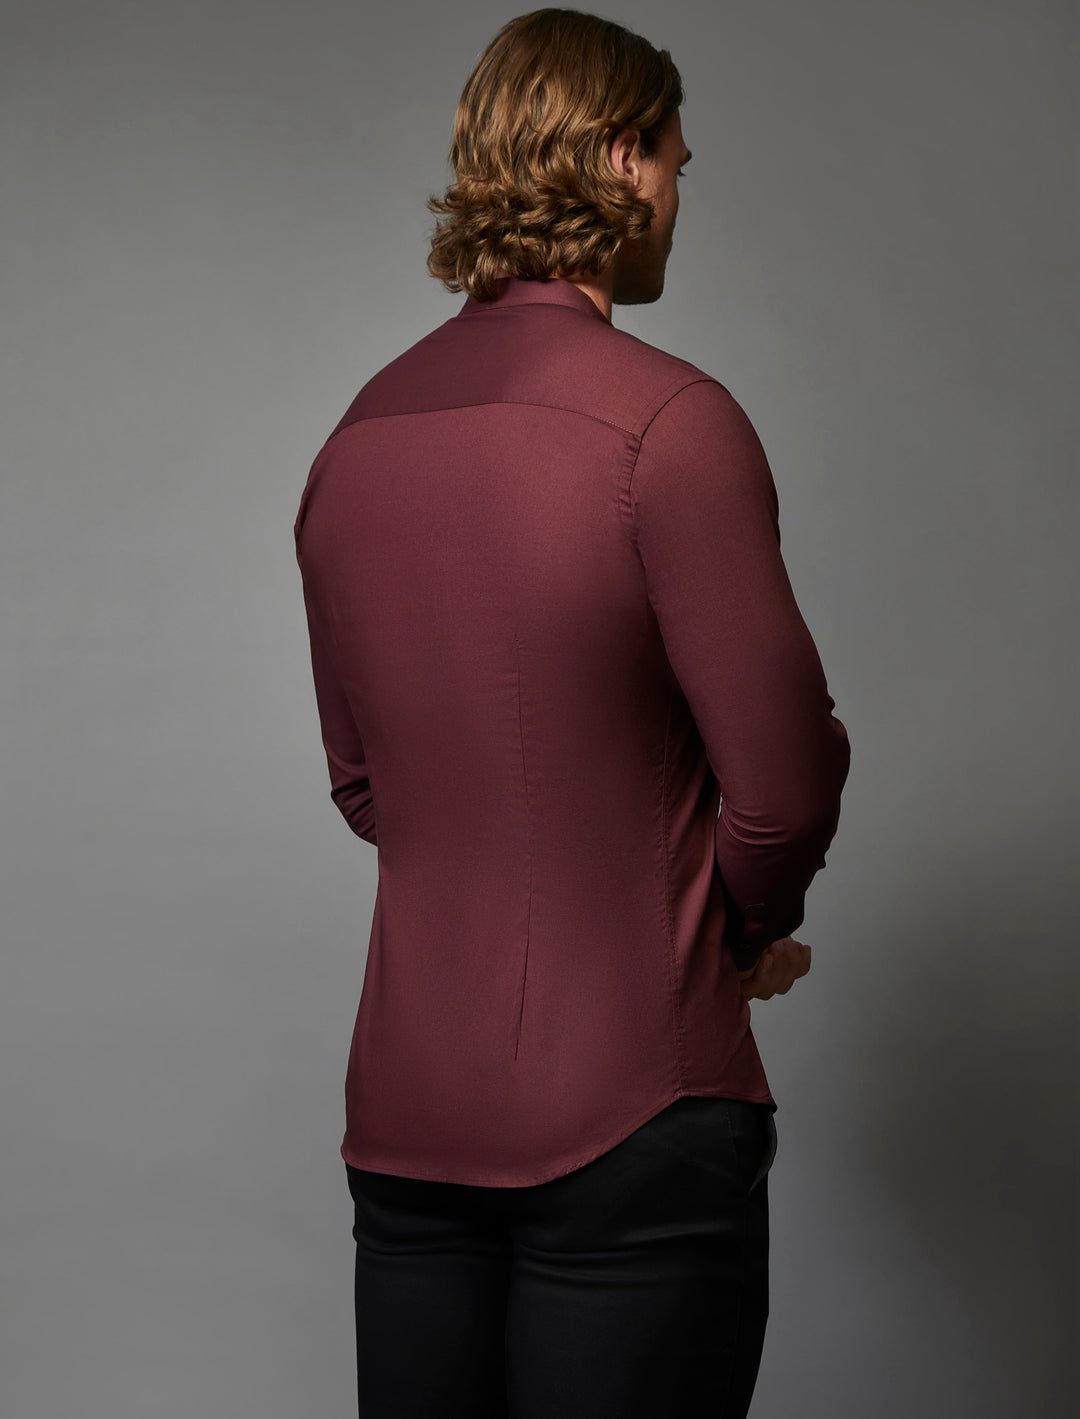 Elegant burgundy muscle fit shirt with a grandad collar style from Tapered Menswear.